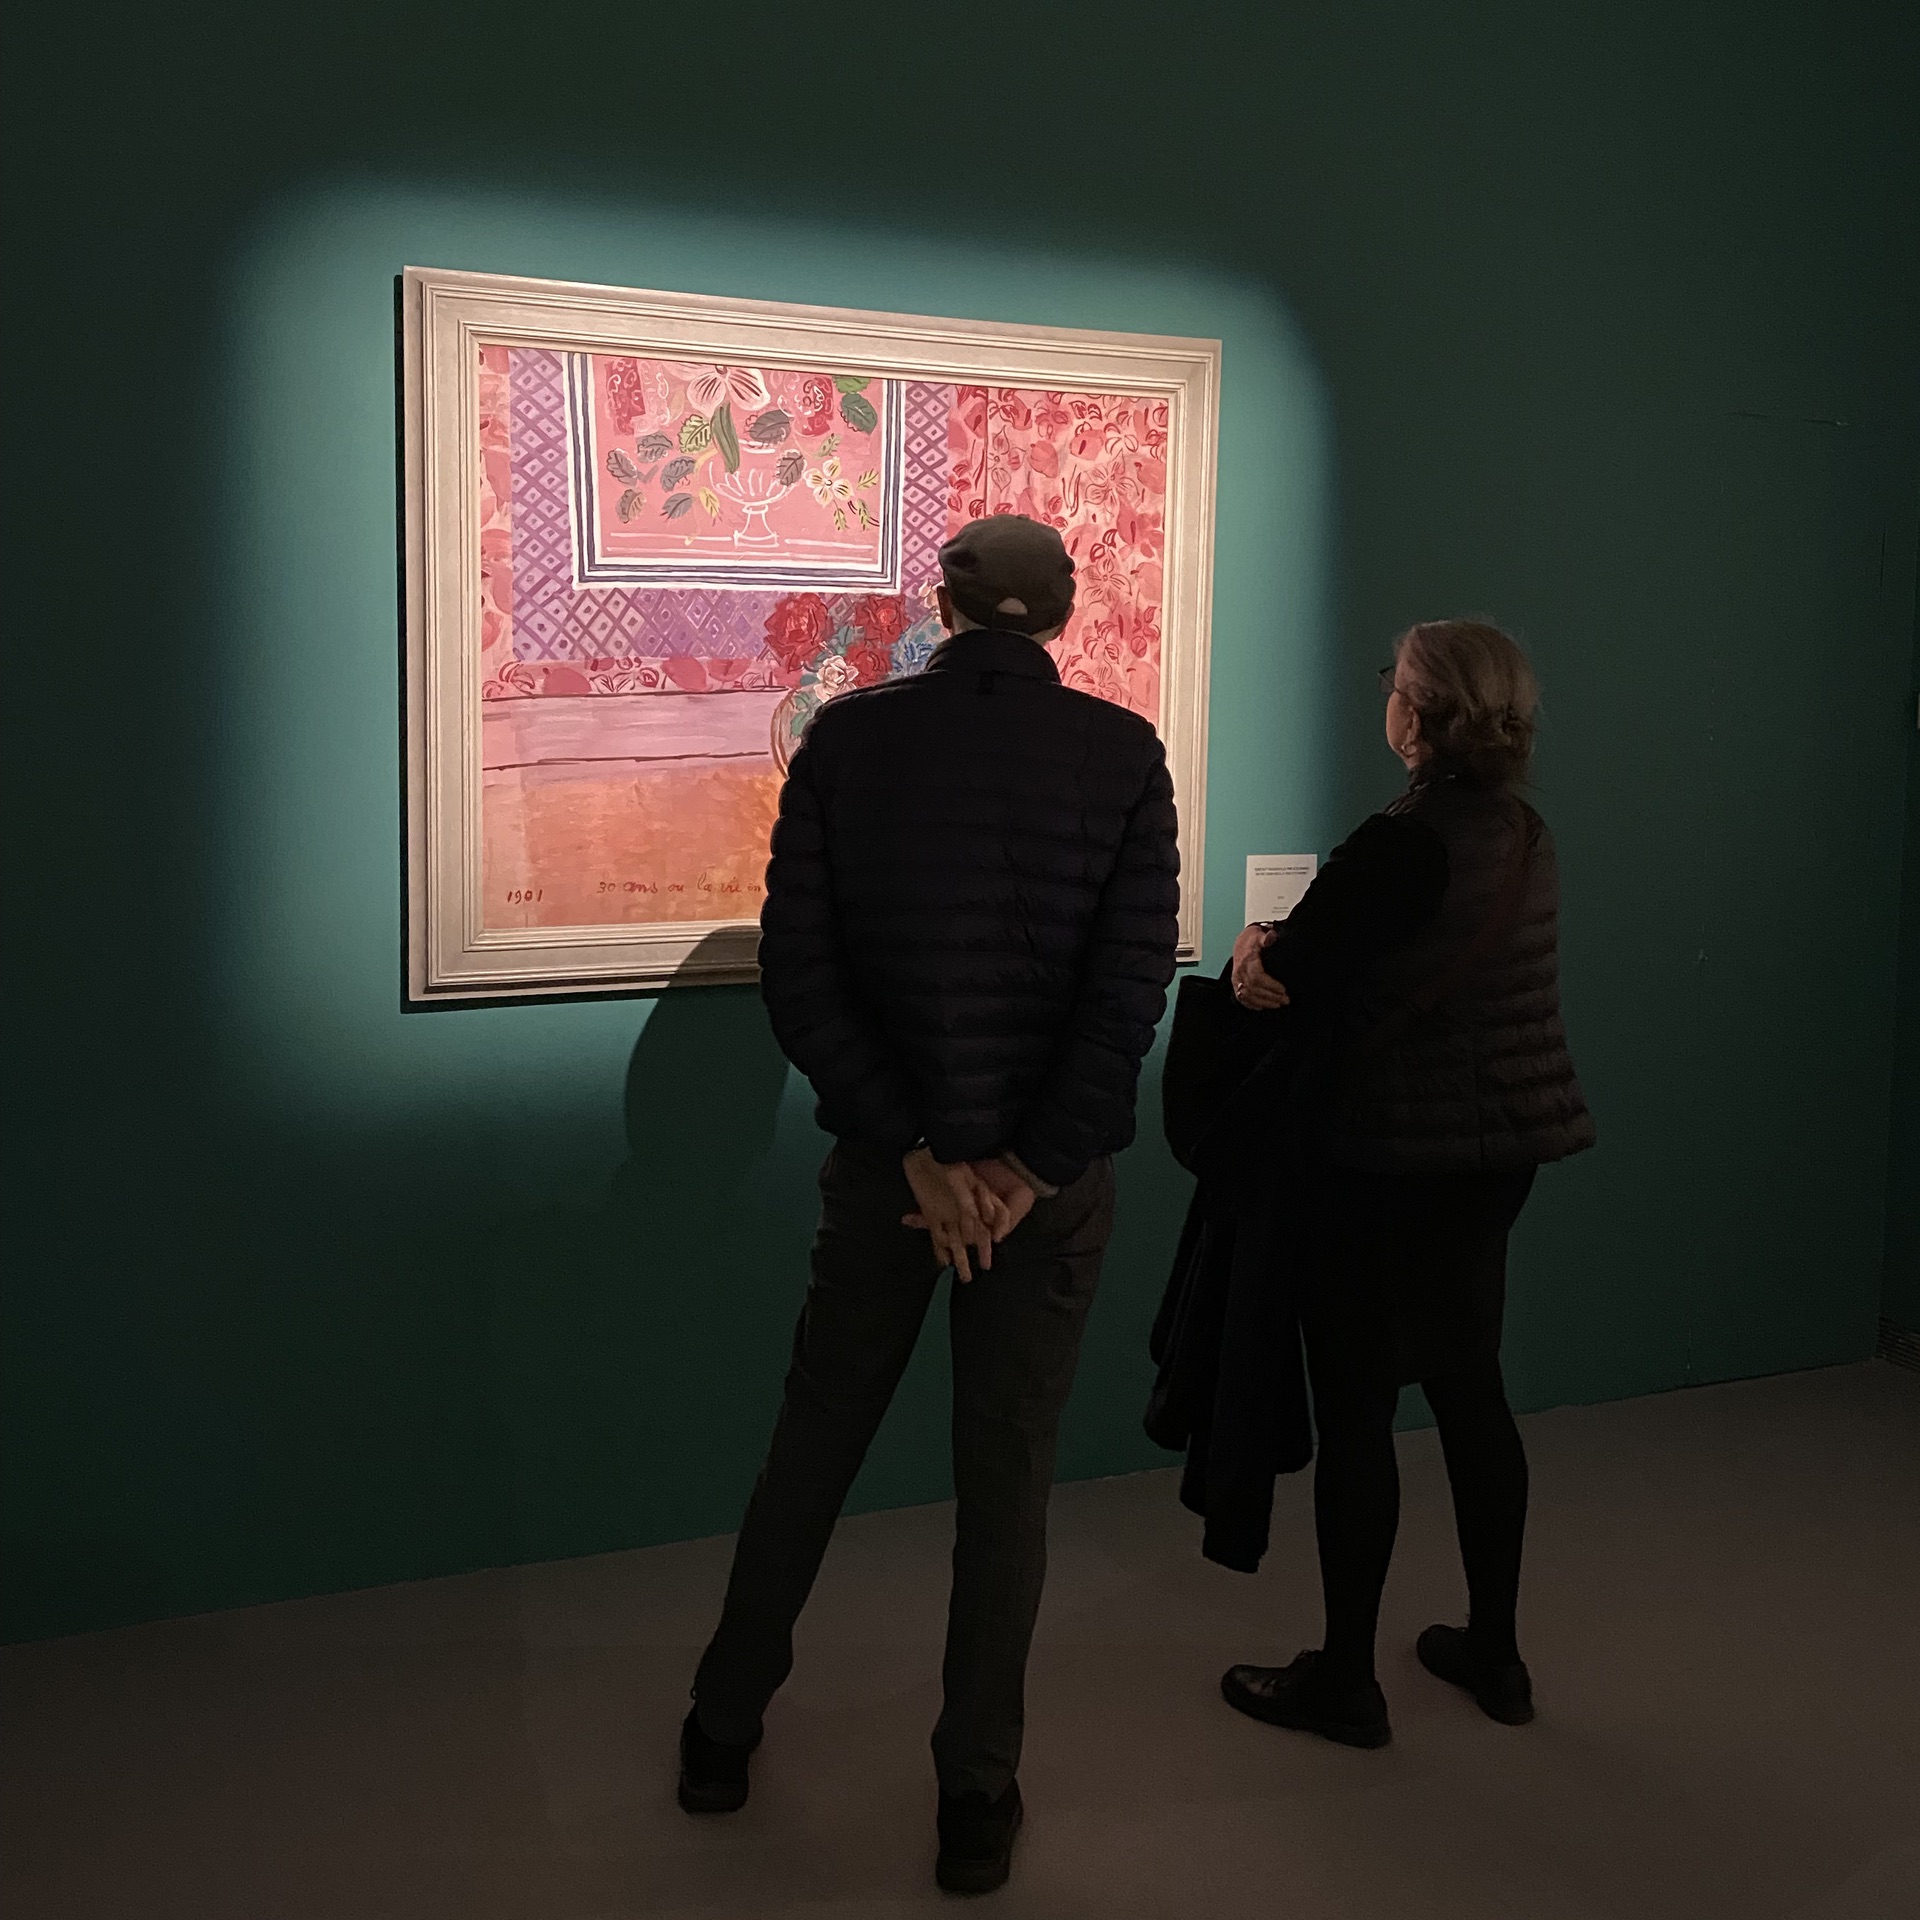 Two people in front of a pink still life, hung on a dark green wall